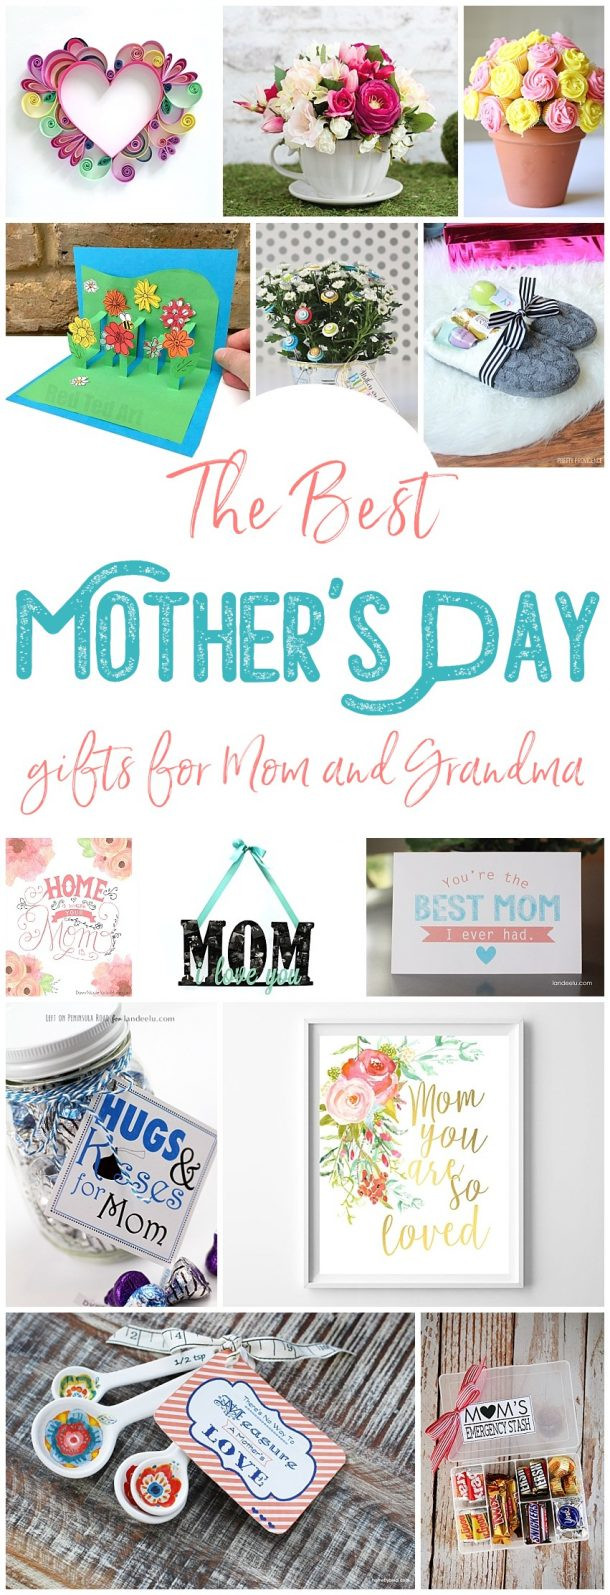 Mother'S Day Gift Ideas From Kids
 The BEST Easy DIY Mother’s Day Gifts and Treats Ideas